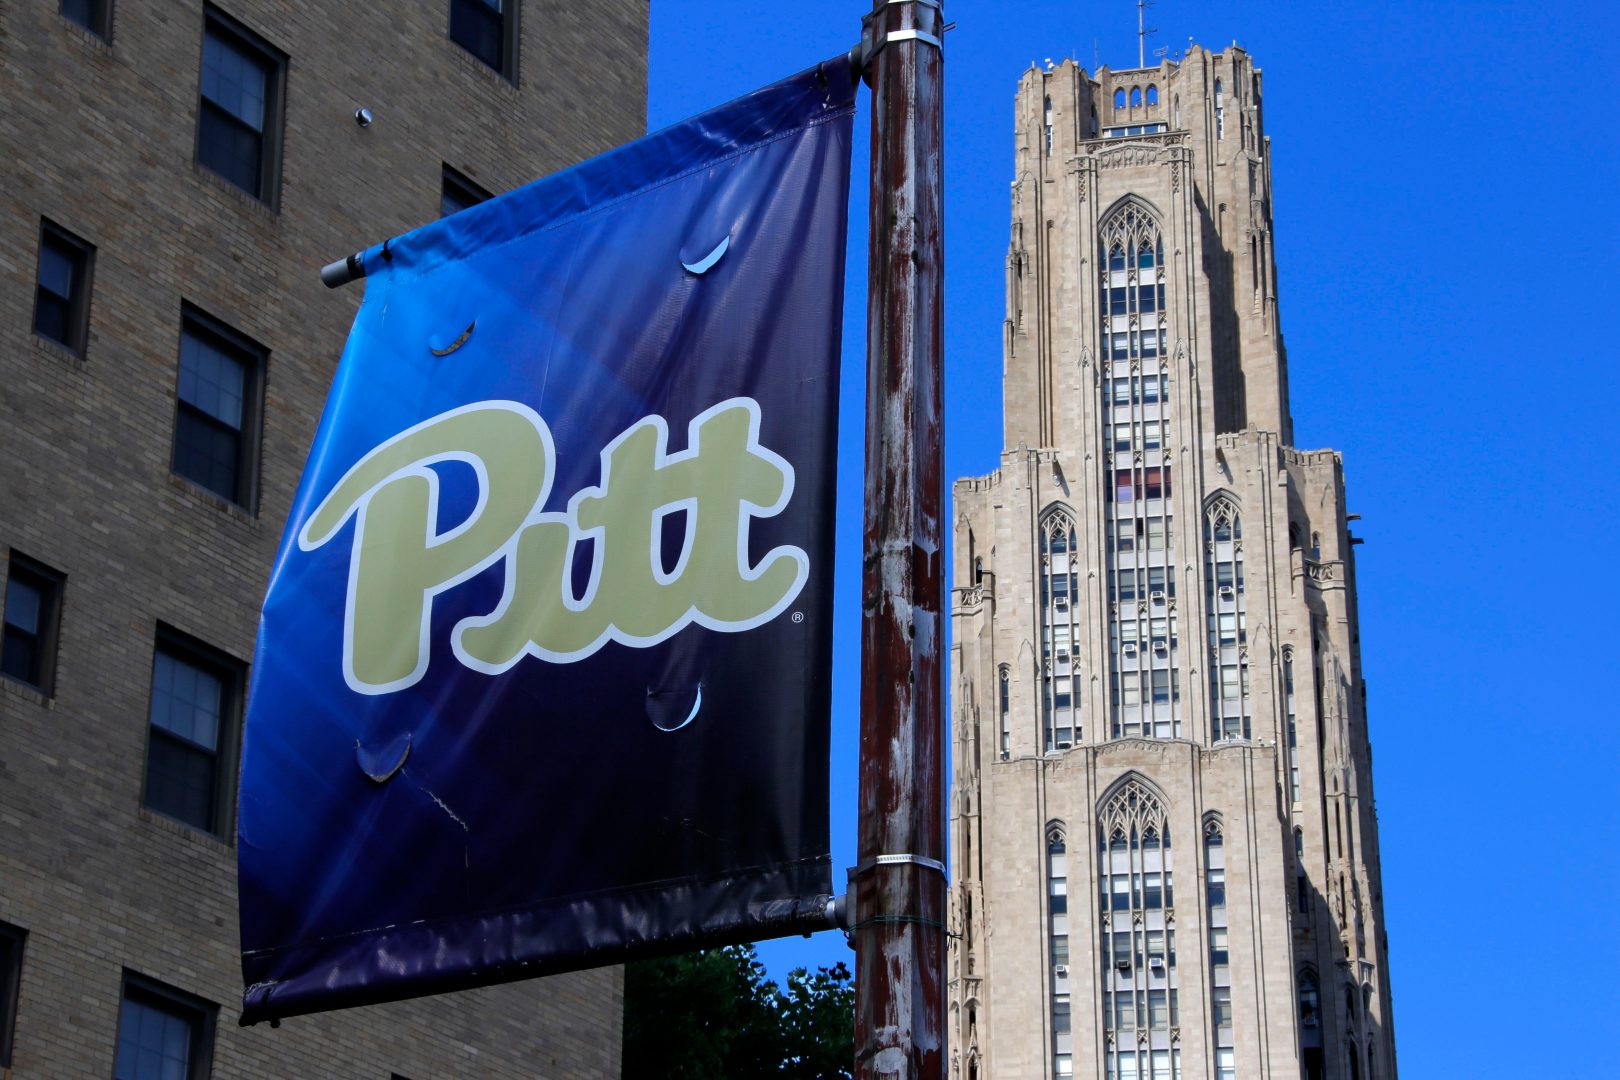 One likely conservative target is the University of Pittsburgh, a private school that received $154 million in state support last year, most of the money earmarked to help keep in-state students’ tuition low.